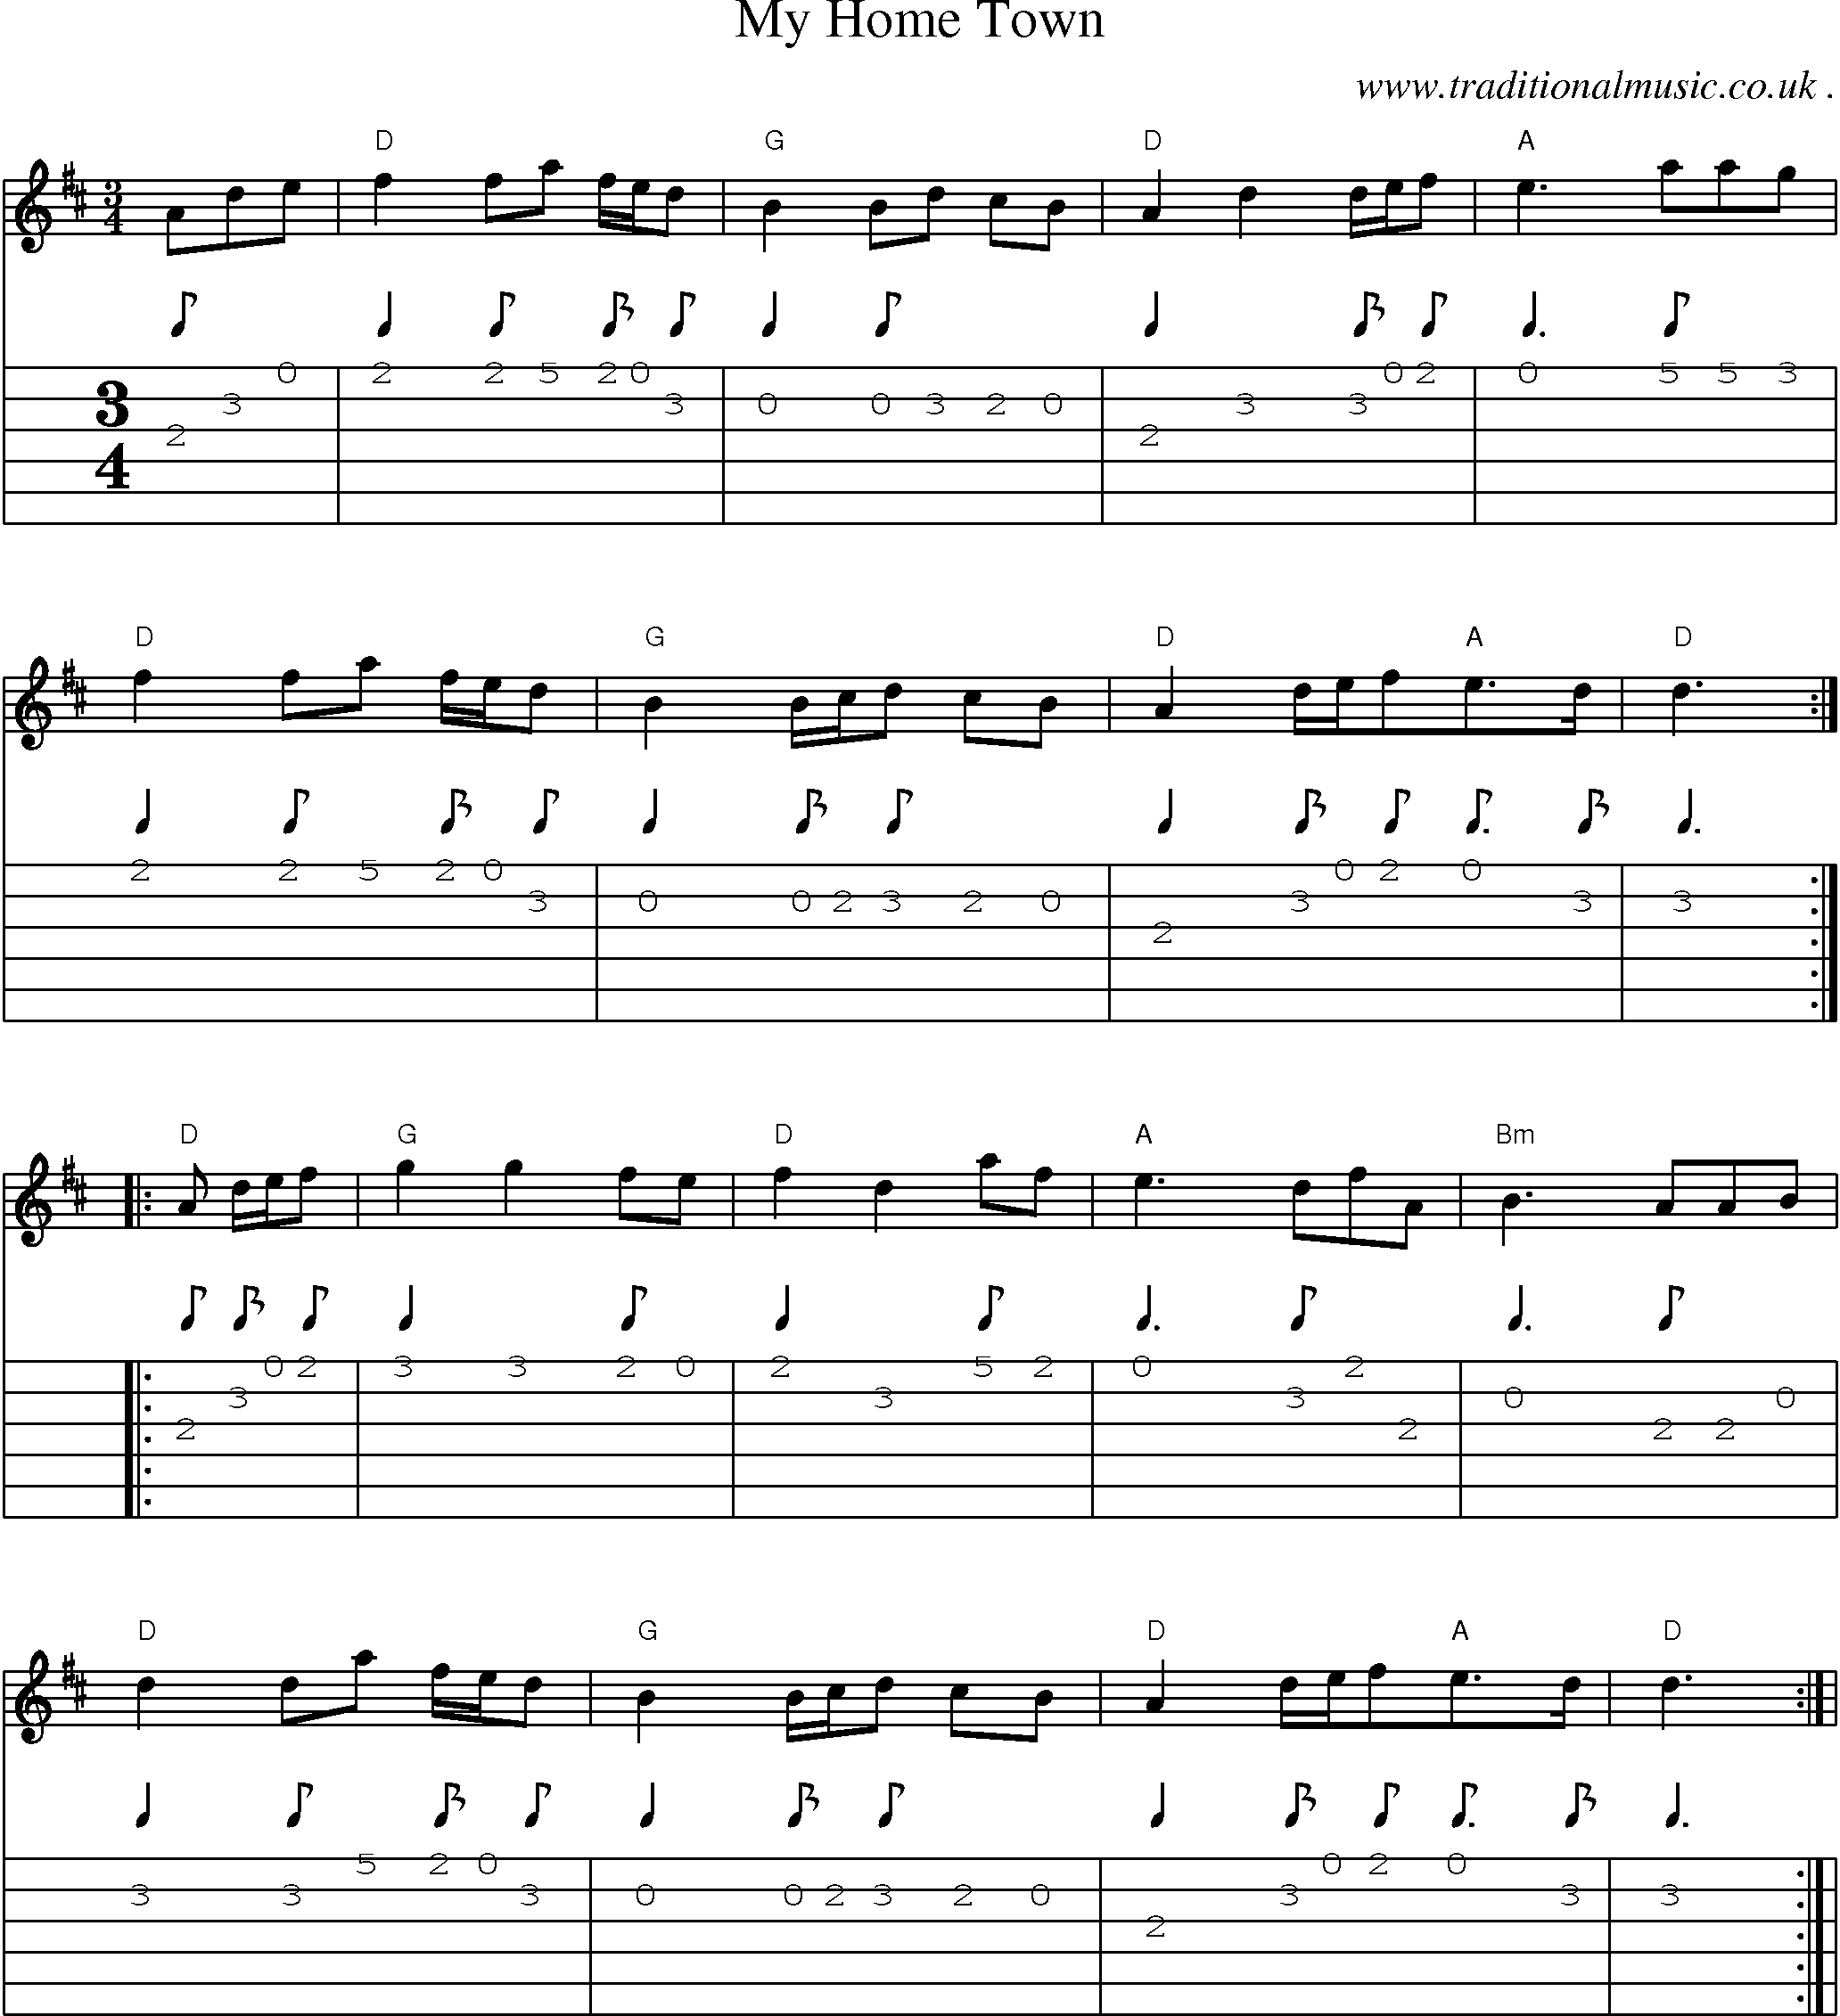 Sheet-Music and Guitar Tabs for My Home Town